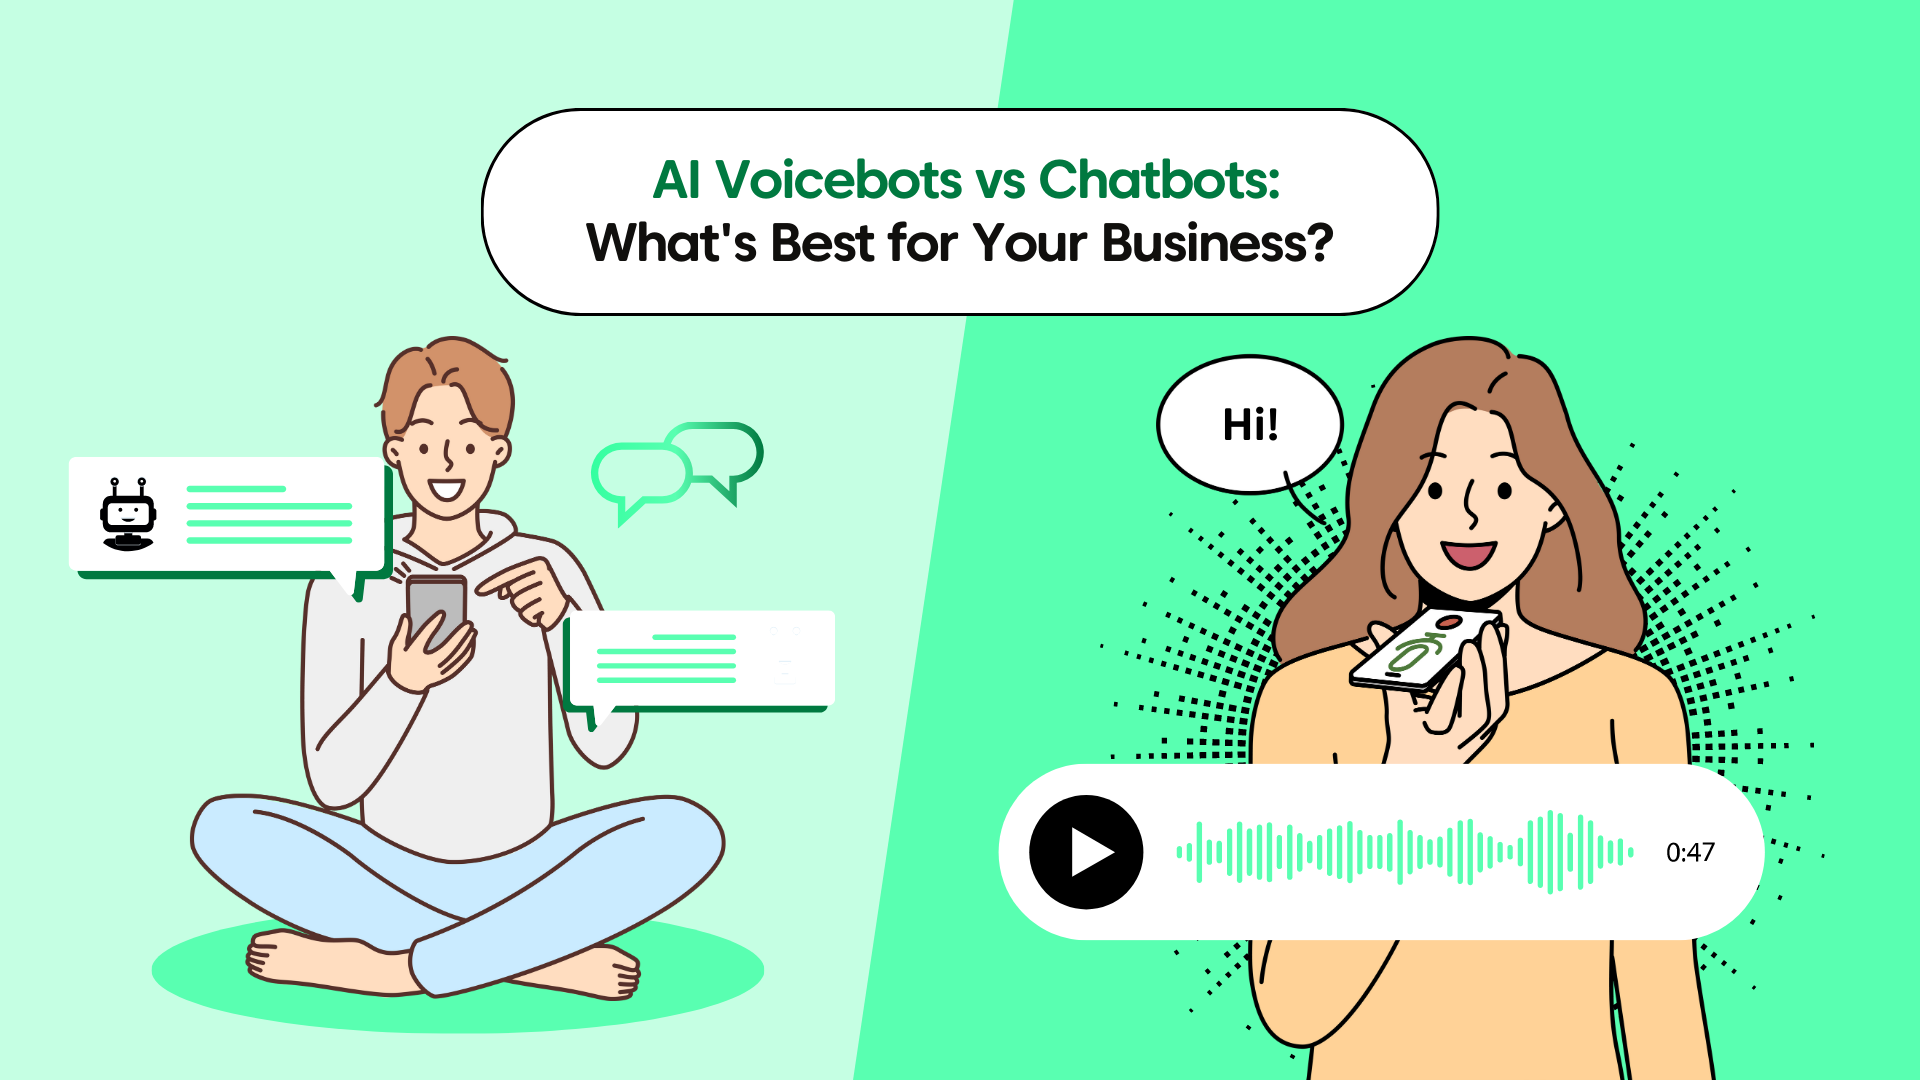 An image showing the head-to-head comparison of voice bot and chatbot